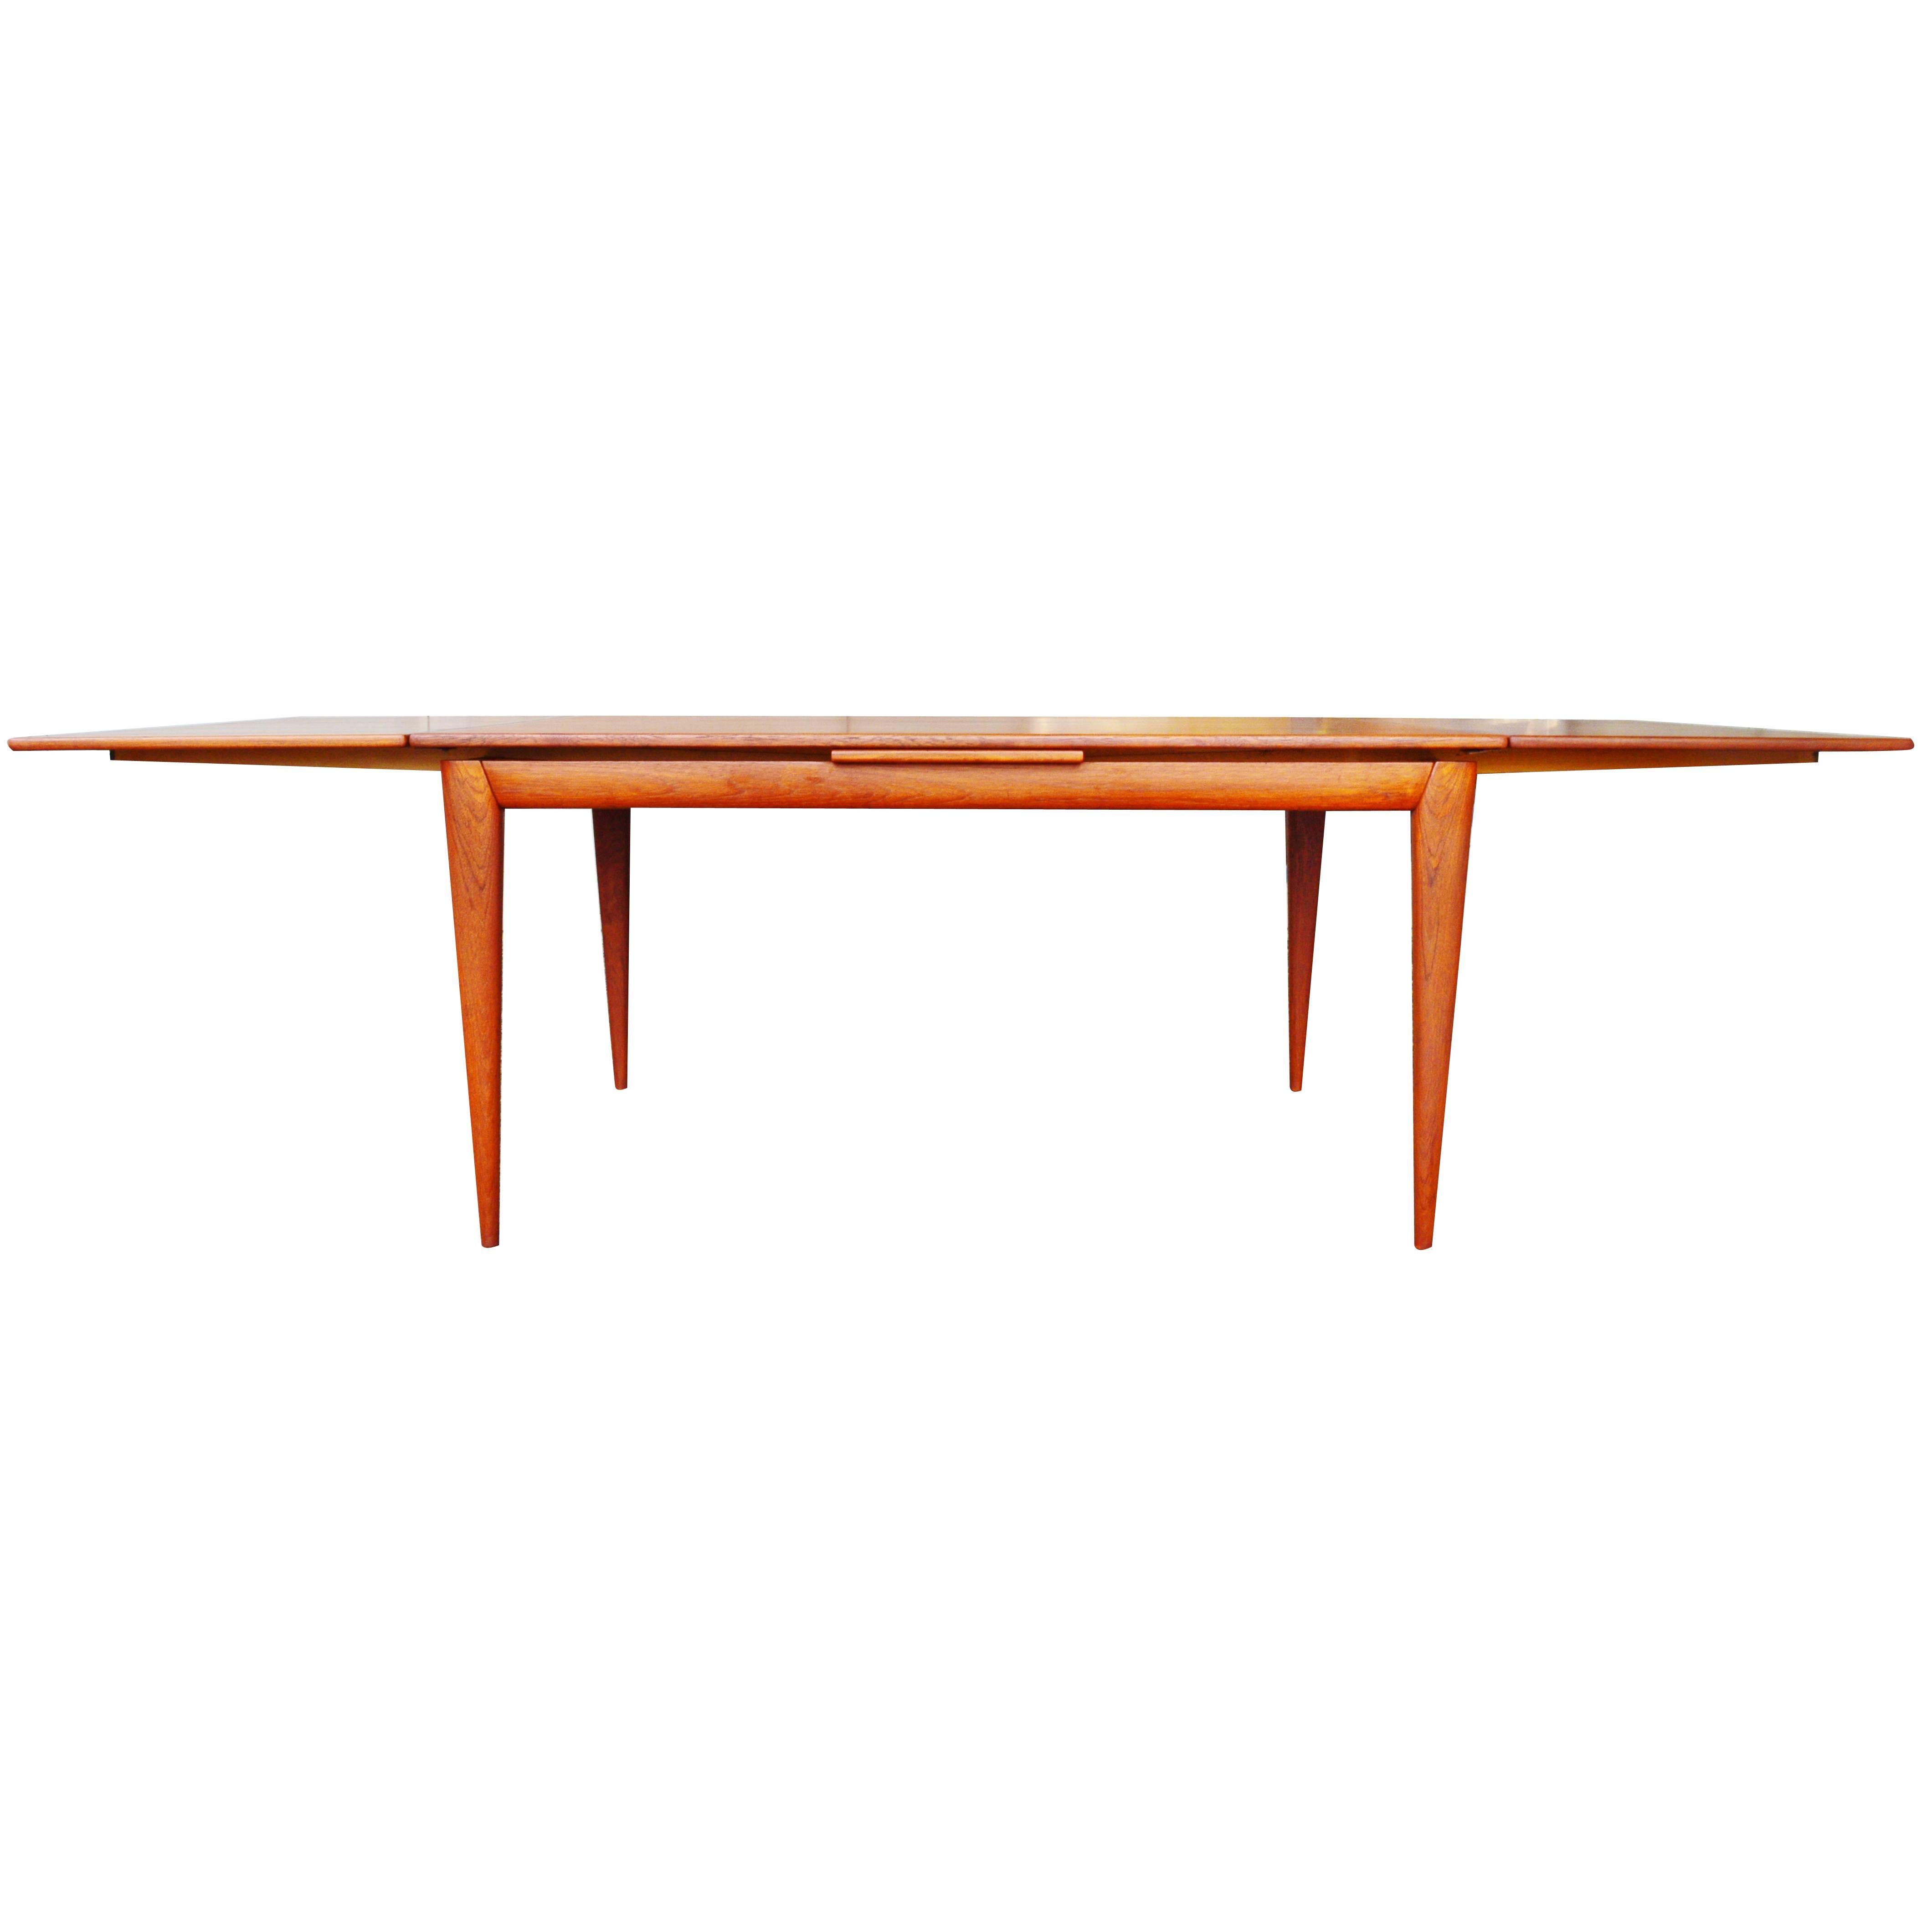 Impeccable No Moller Rare Teak Extending Dining Table with Sexy Apron and Legs